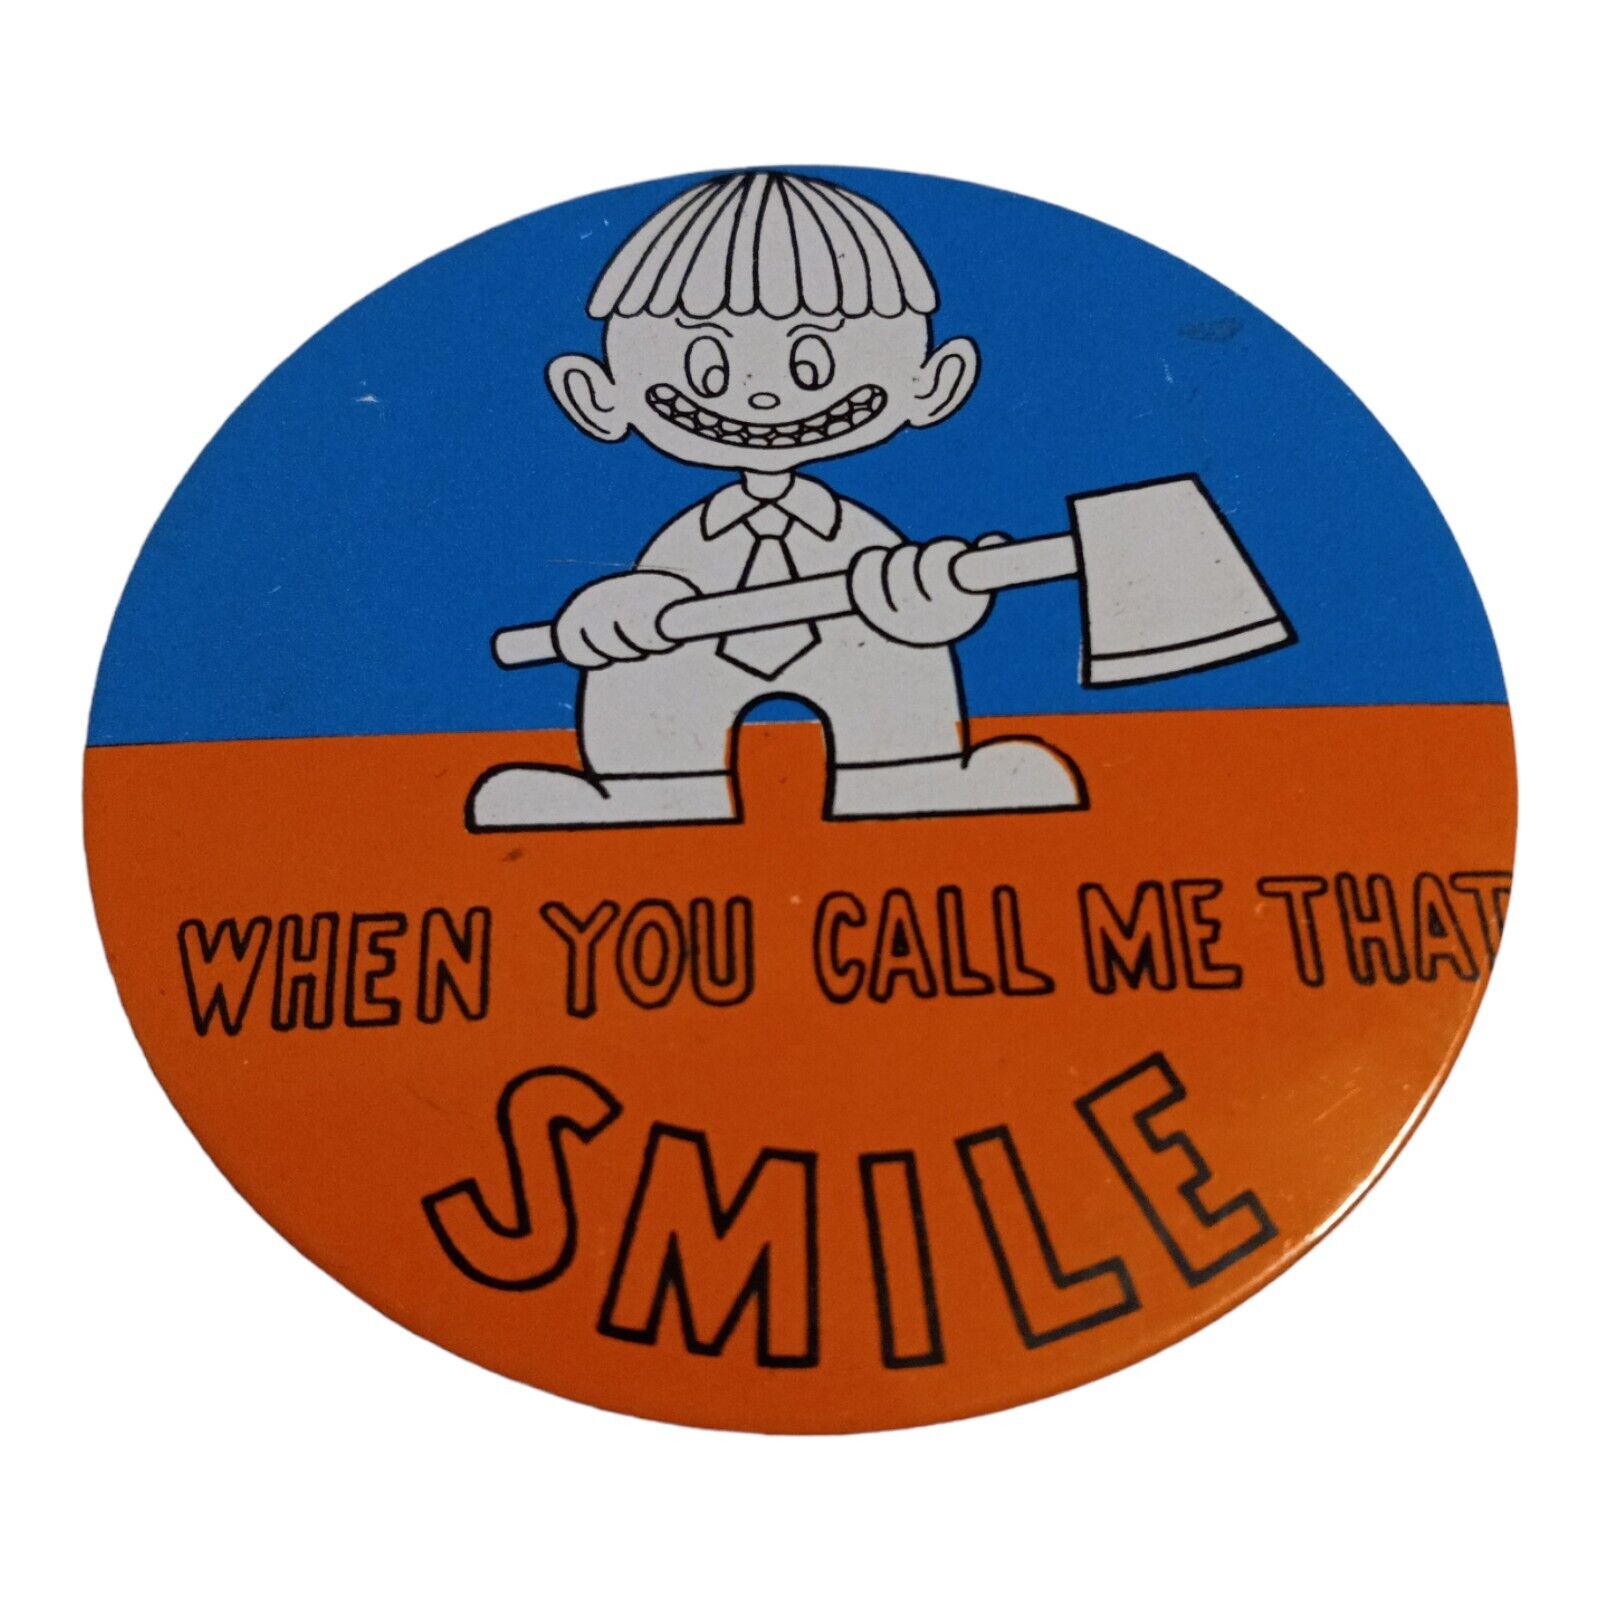 When You Call Me That Smile vintage Button Pin Made In Japan Humorous 